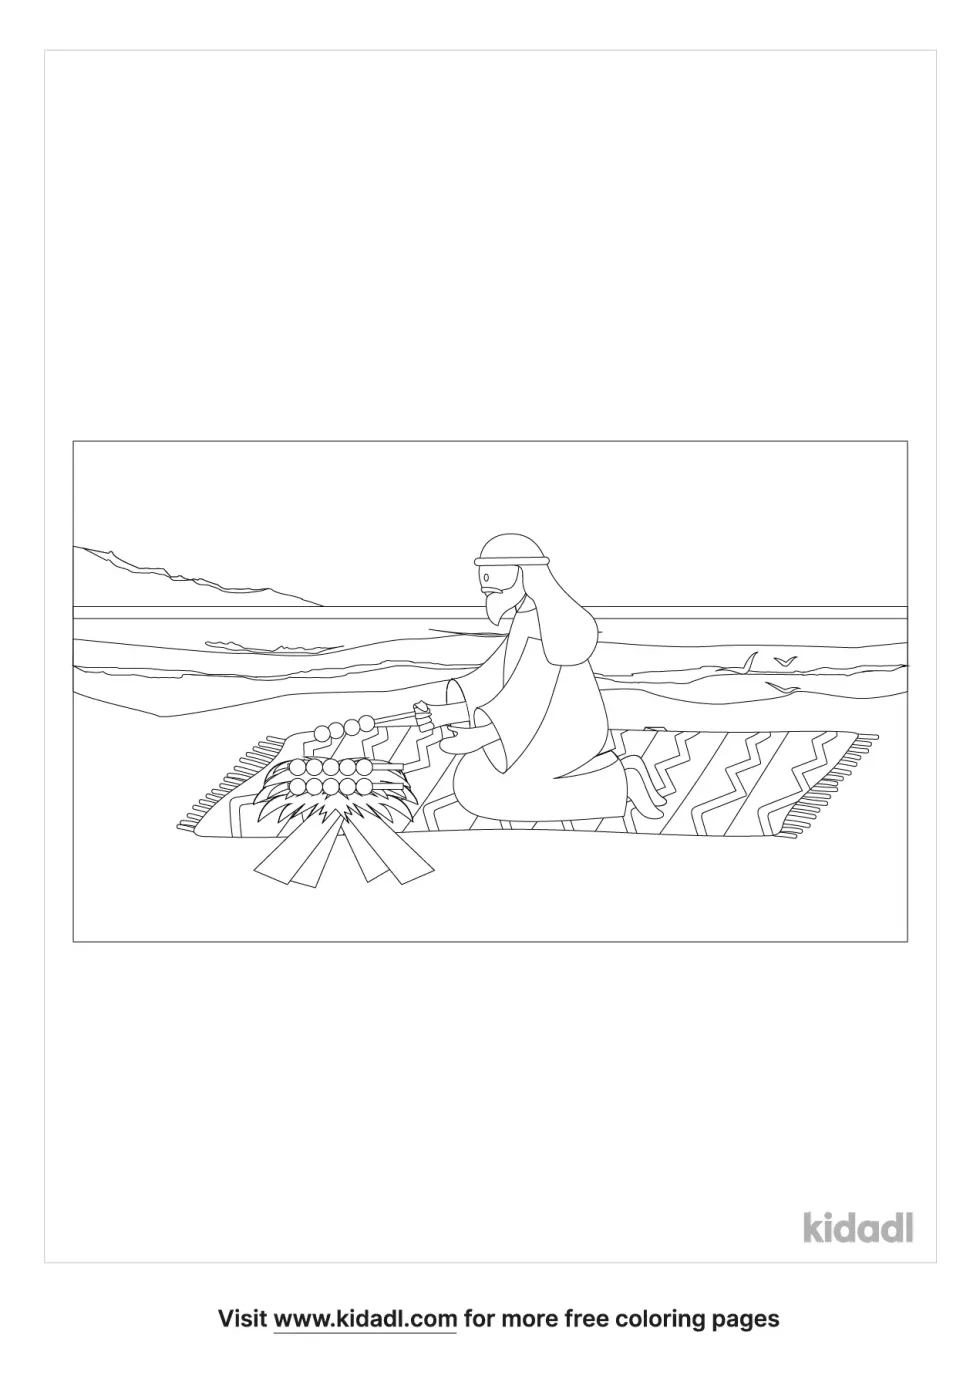 Jesus Makes Breakfast On The Beach Coloring Page